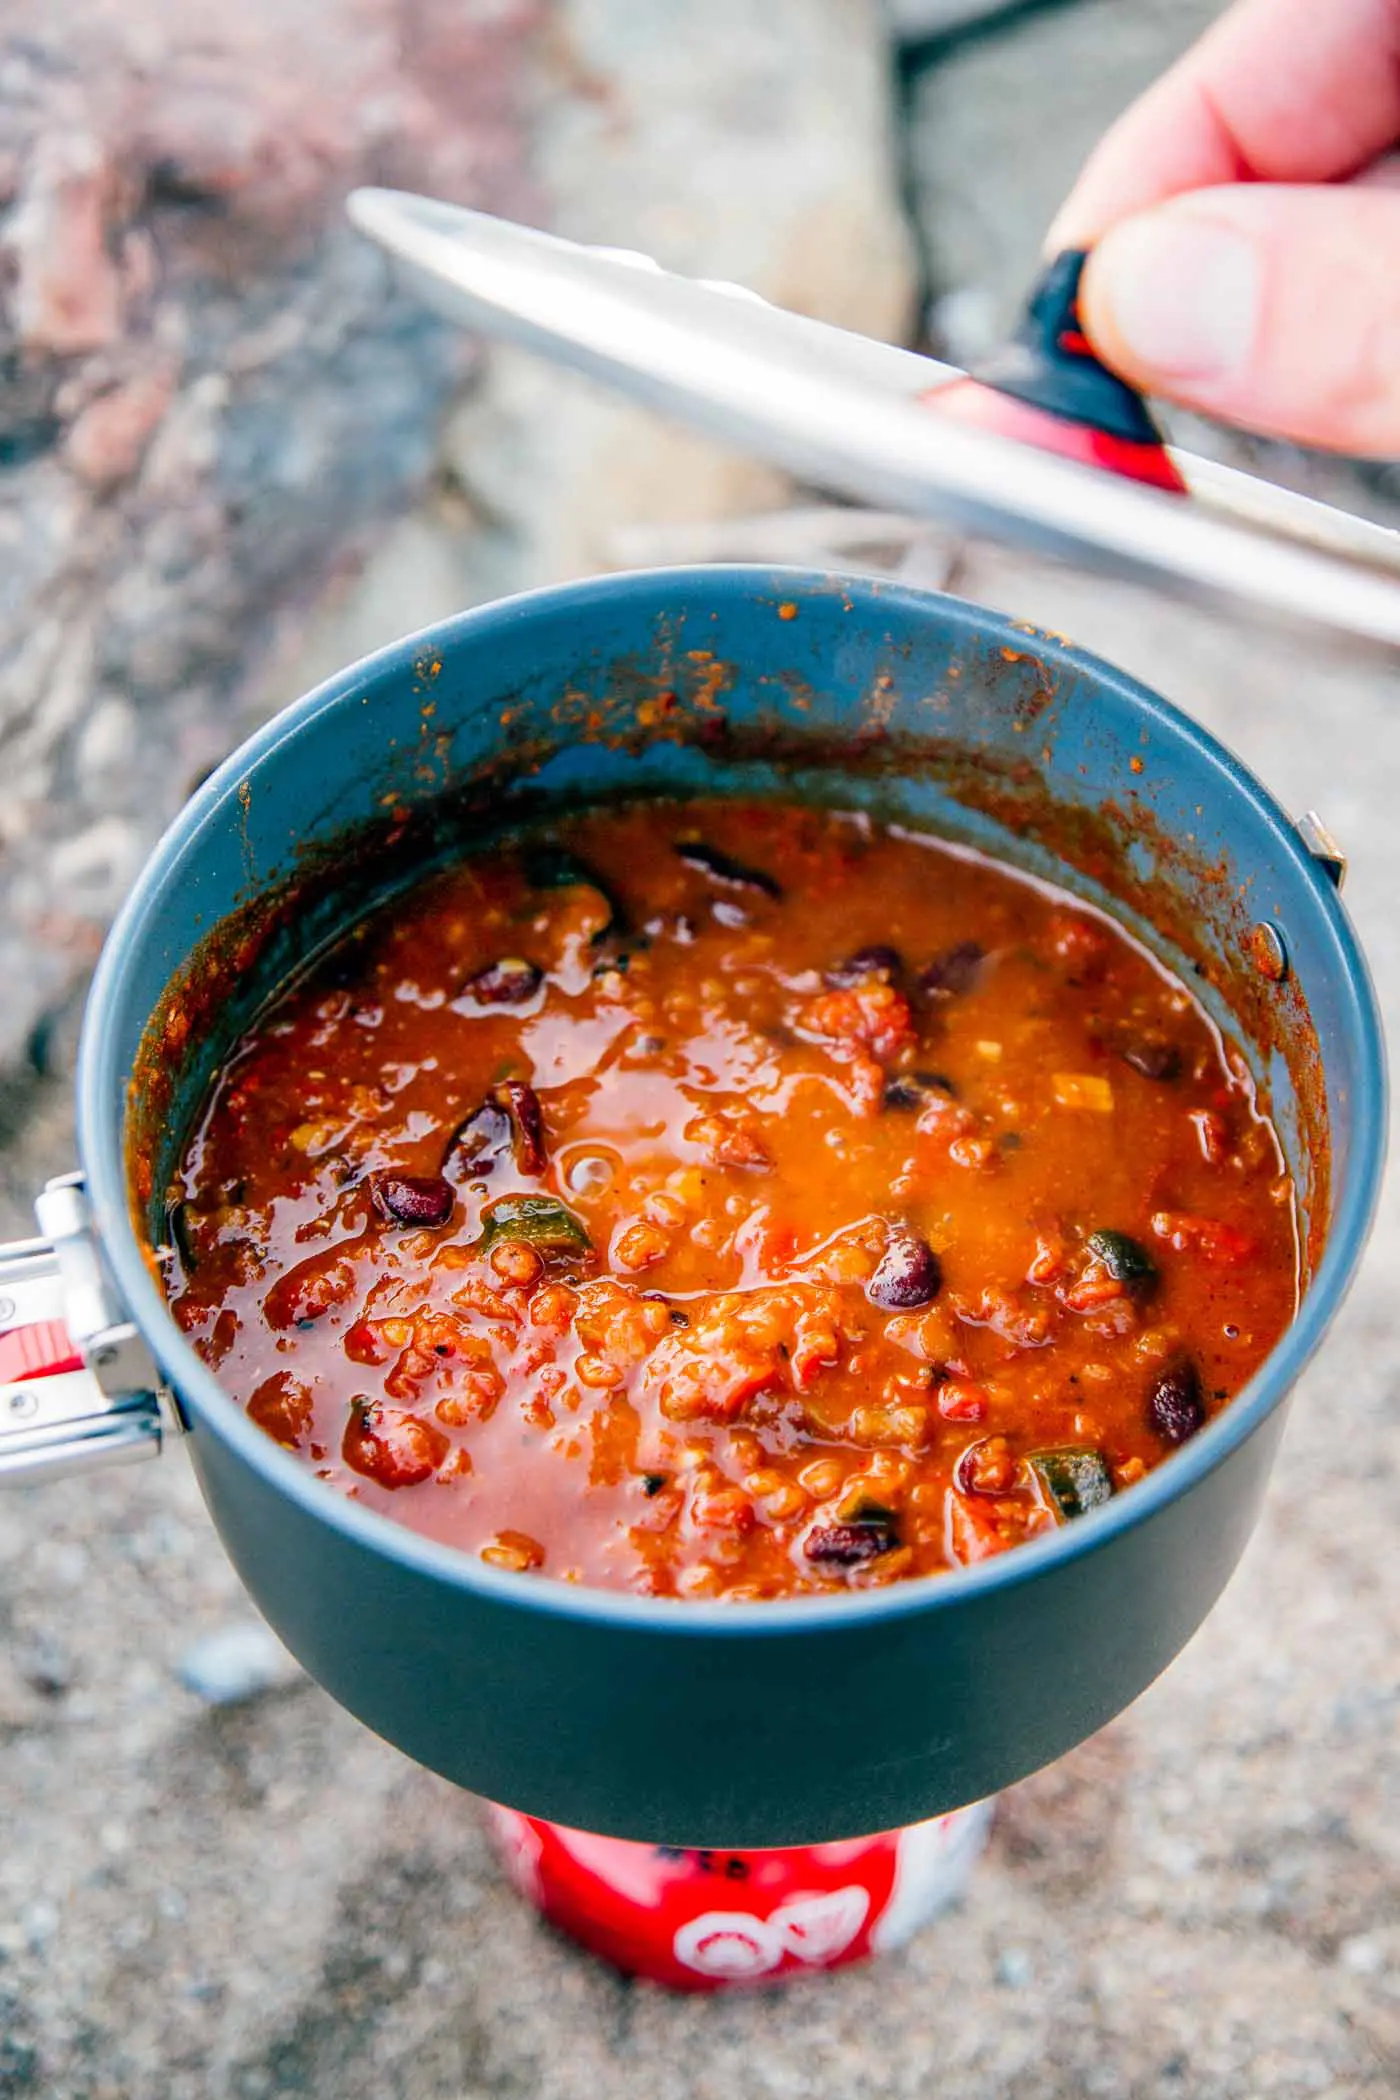 A backpacking pot full of red lentil chili.